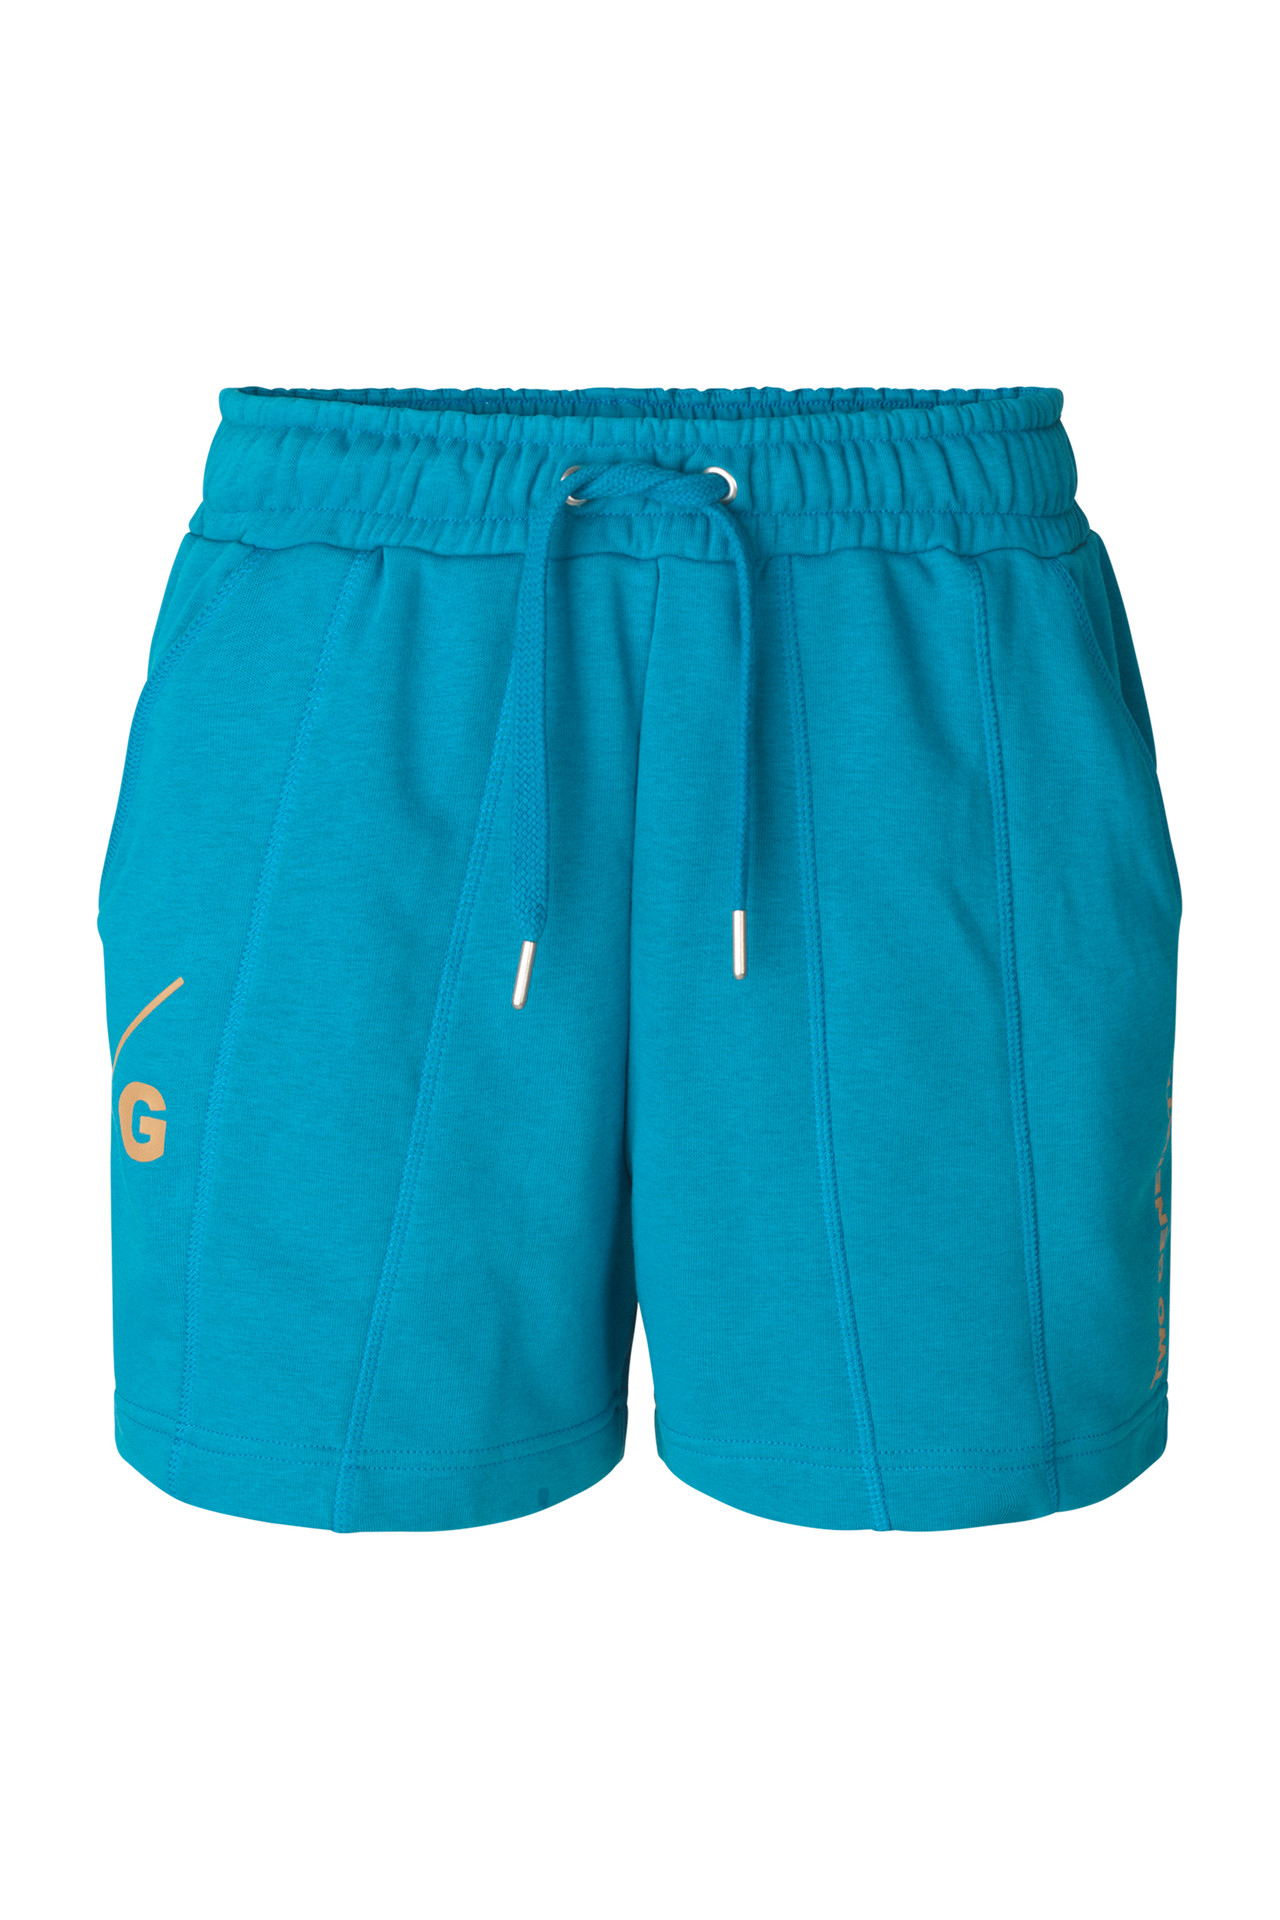 TWO GENERATIONS Tennessee shorts (AZUR BLUE XL)